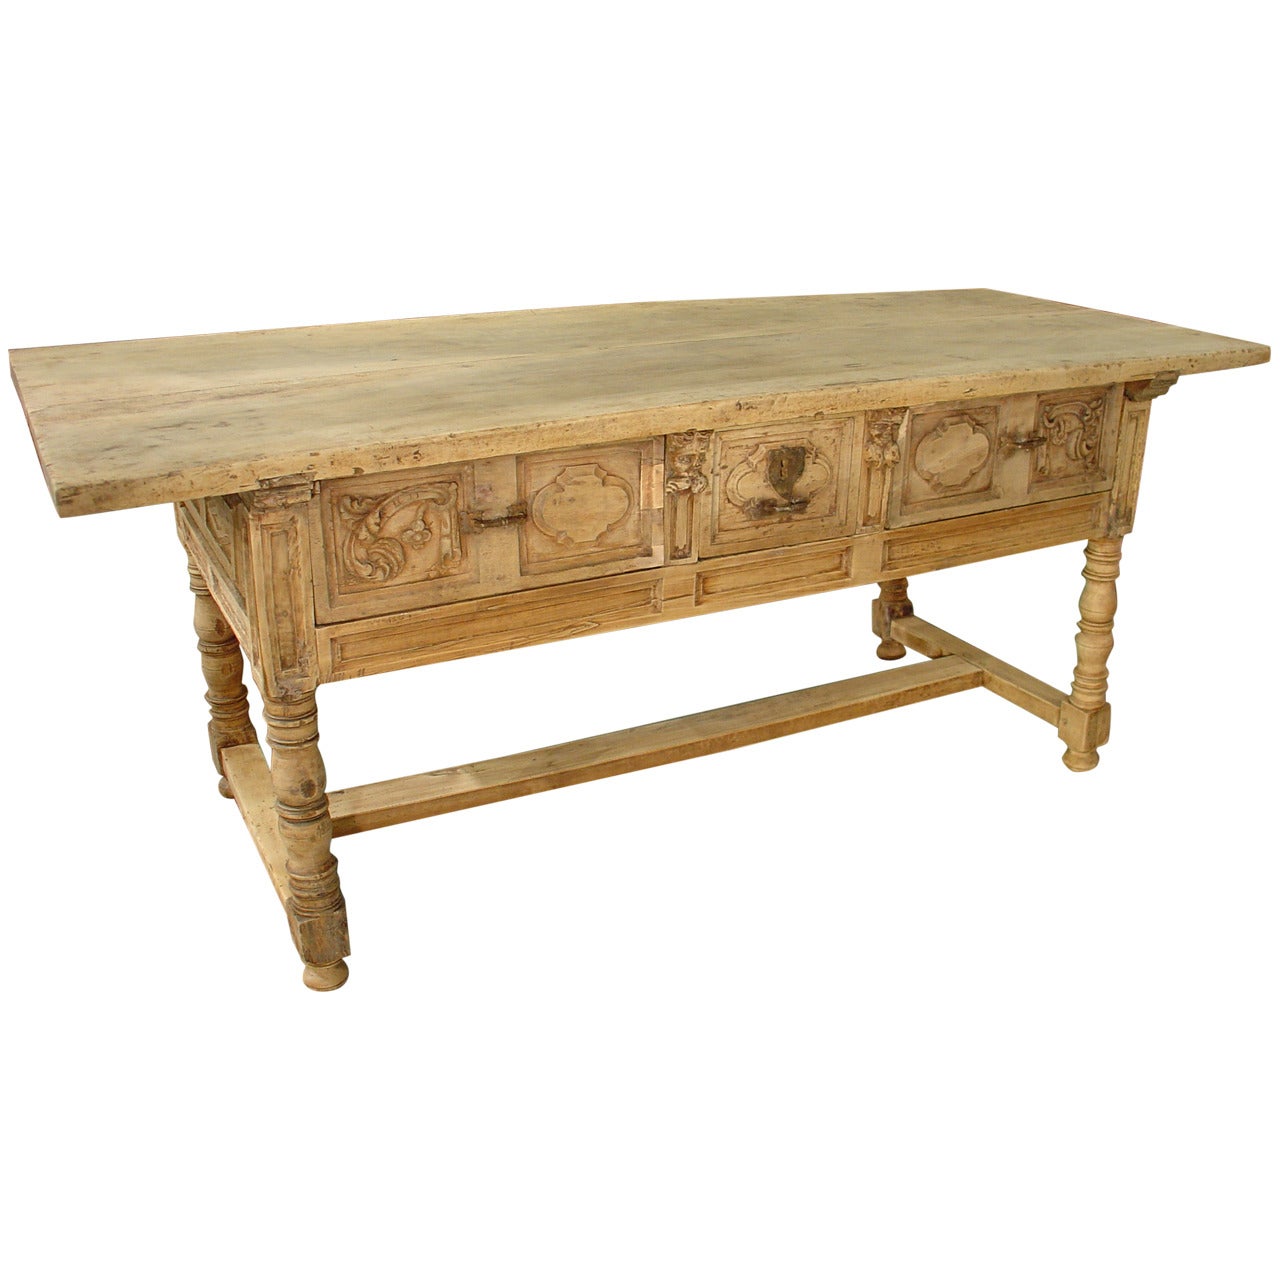 18th Century Stripped Walnut Wood Table from Italy